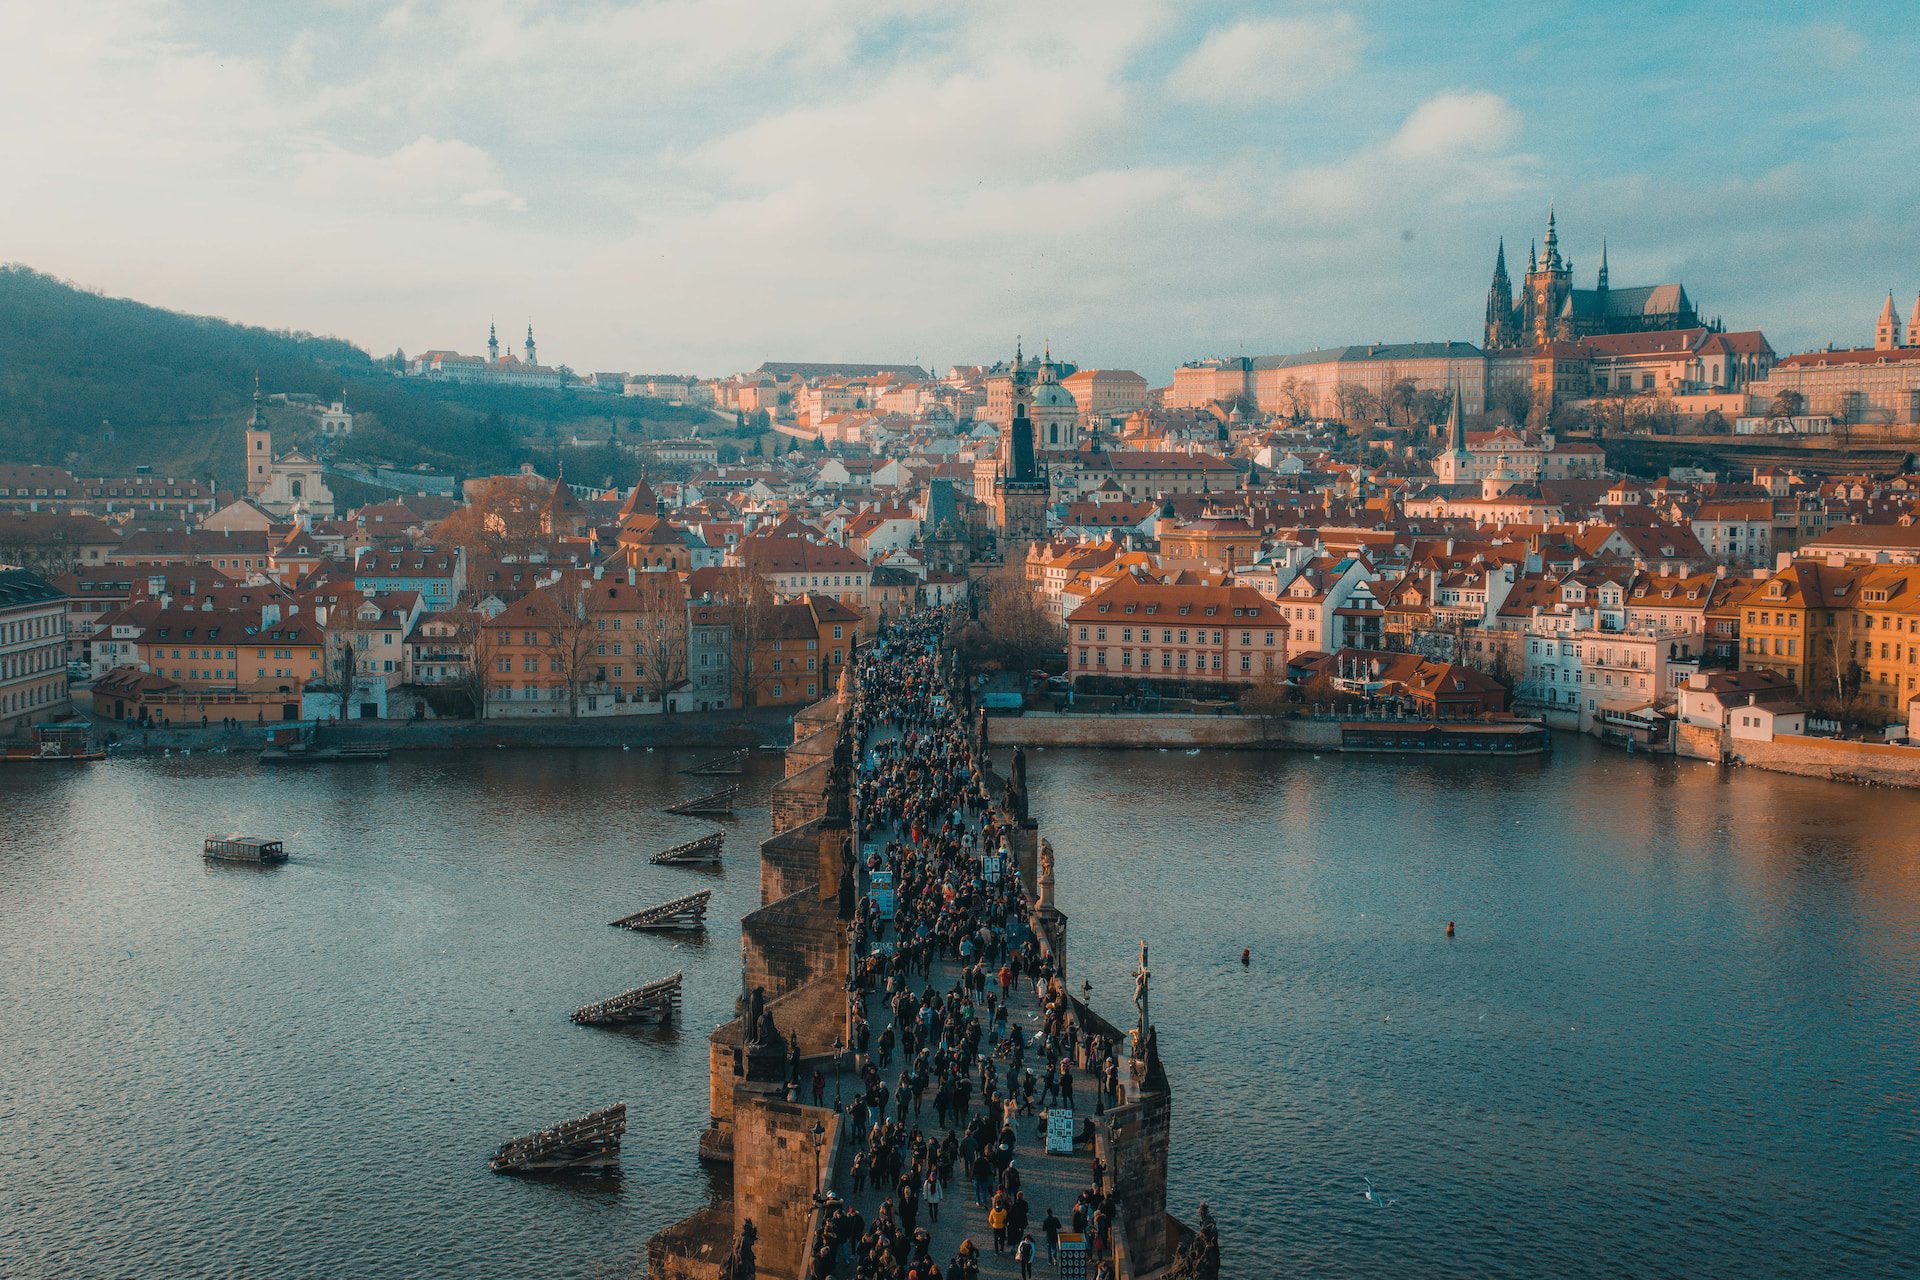 Panoramic view from Charles Bridge tower, overlooking the Vtlava River and central Prague.